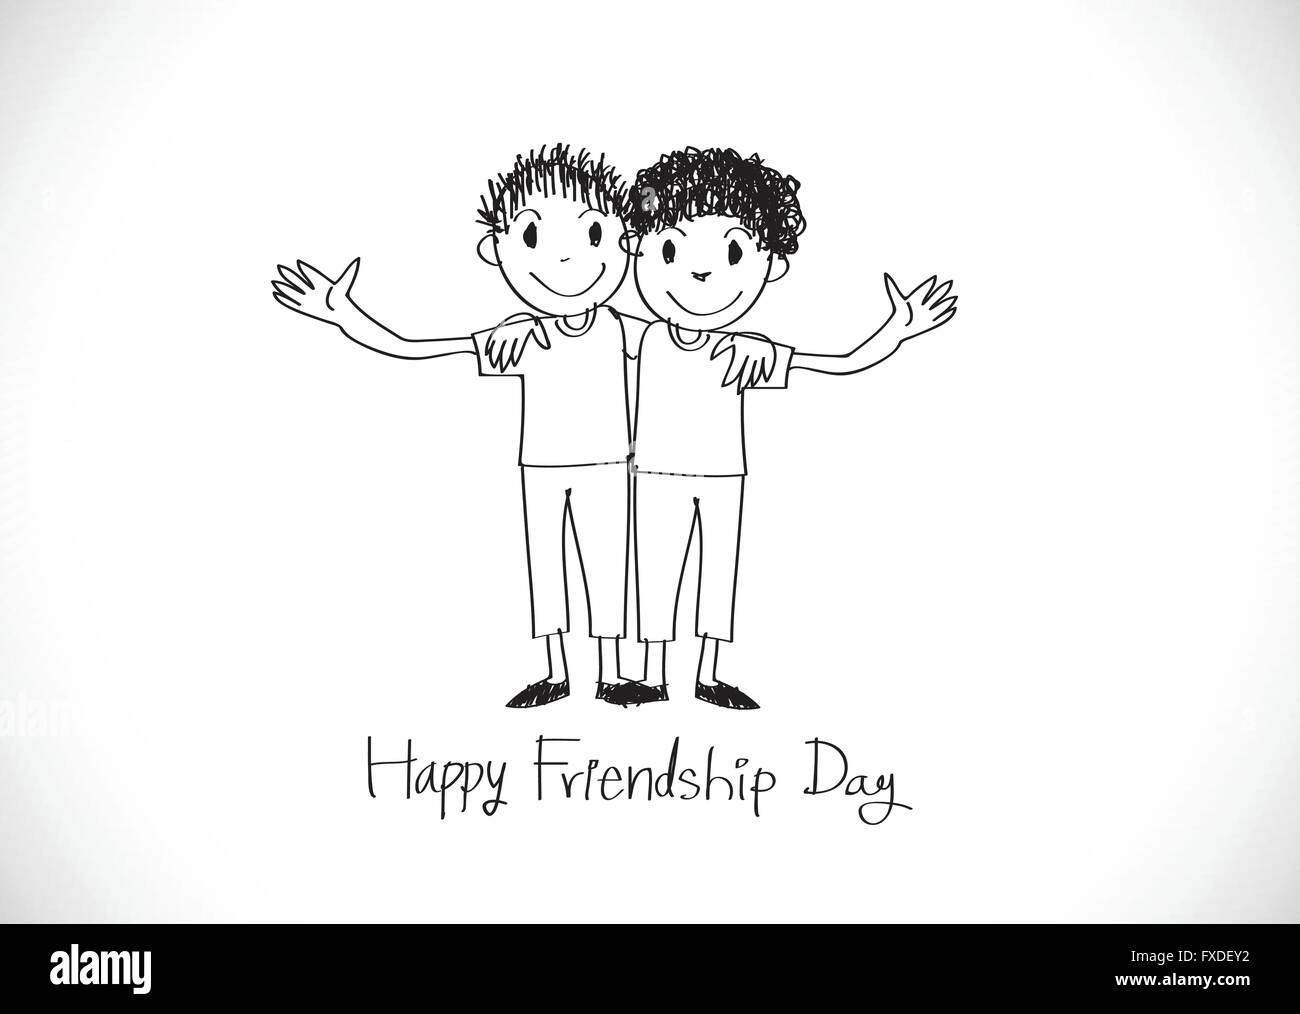 Happy Friendship Day and Best Friends Forever idea design Stock ...